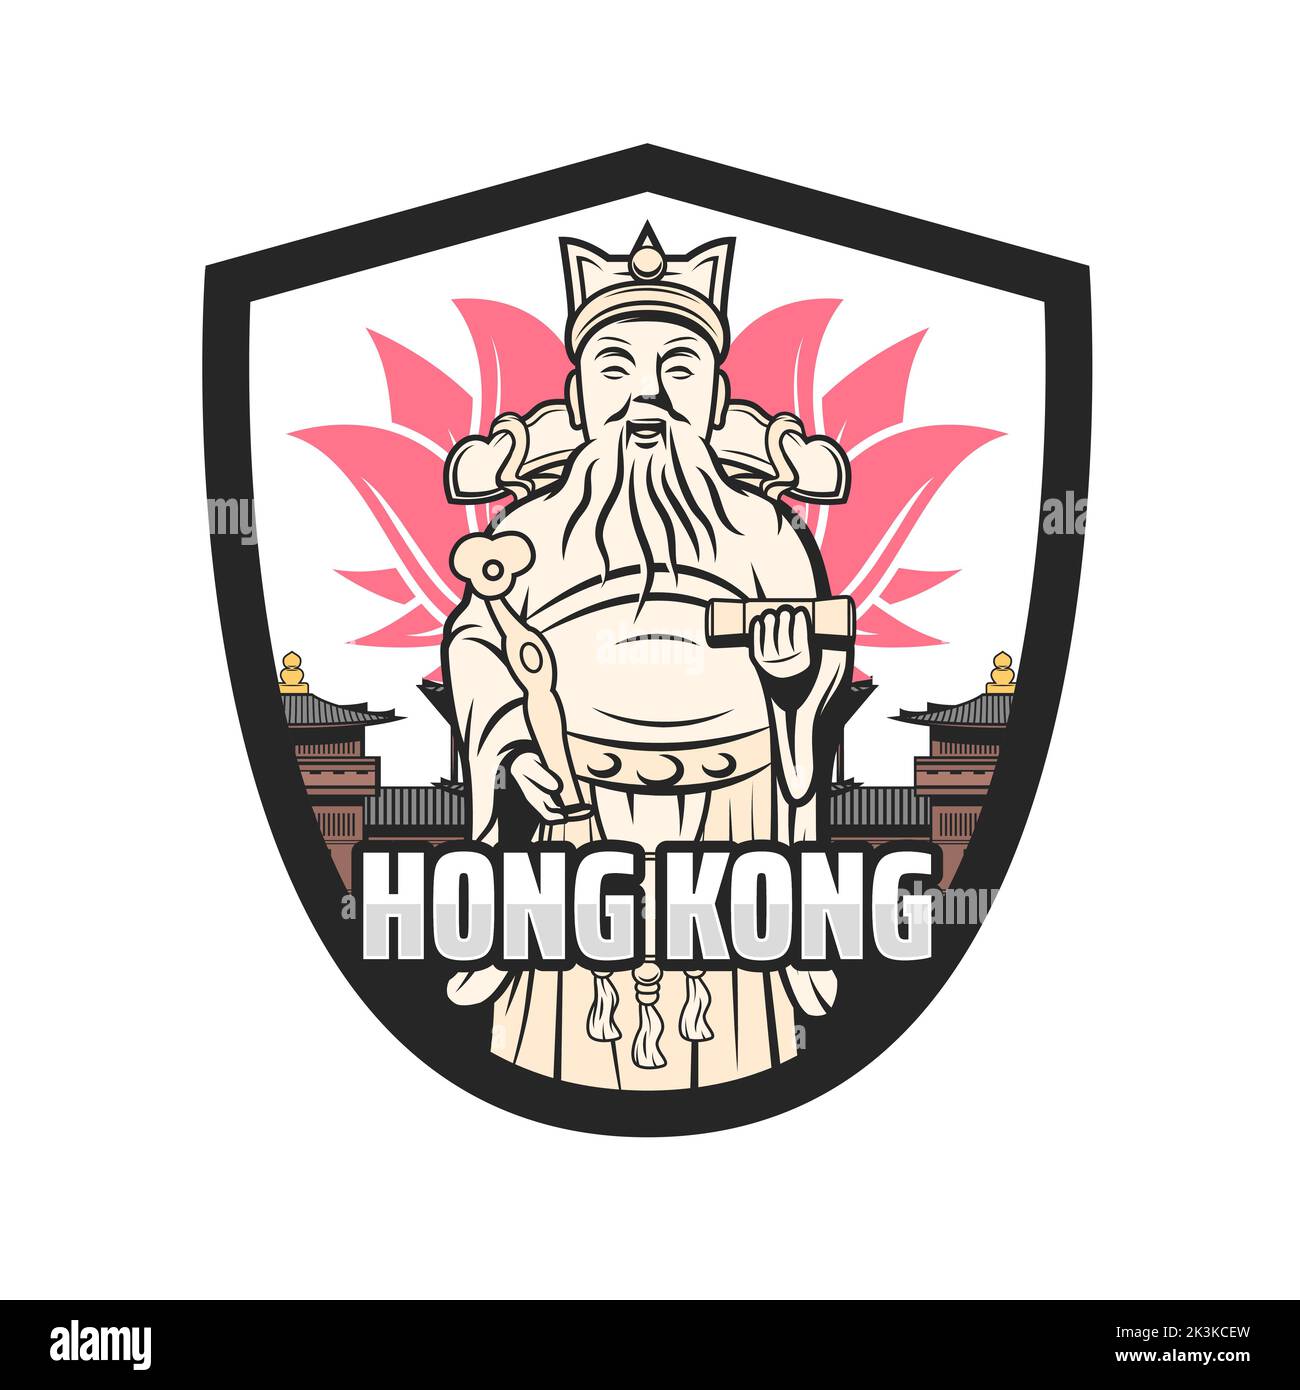 Hong Kong travel icon with smiling god of luck, buddhist monastery, temple and lotus flower. Hong Kong city culture, religion attractions or landmarks. Retro vector badge with Hong Kong symbols Stock Vector